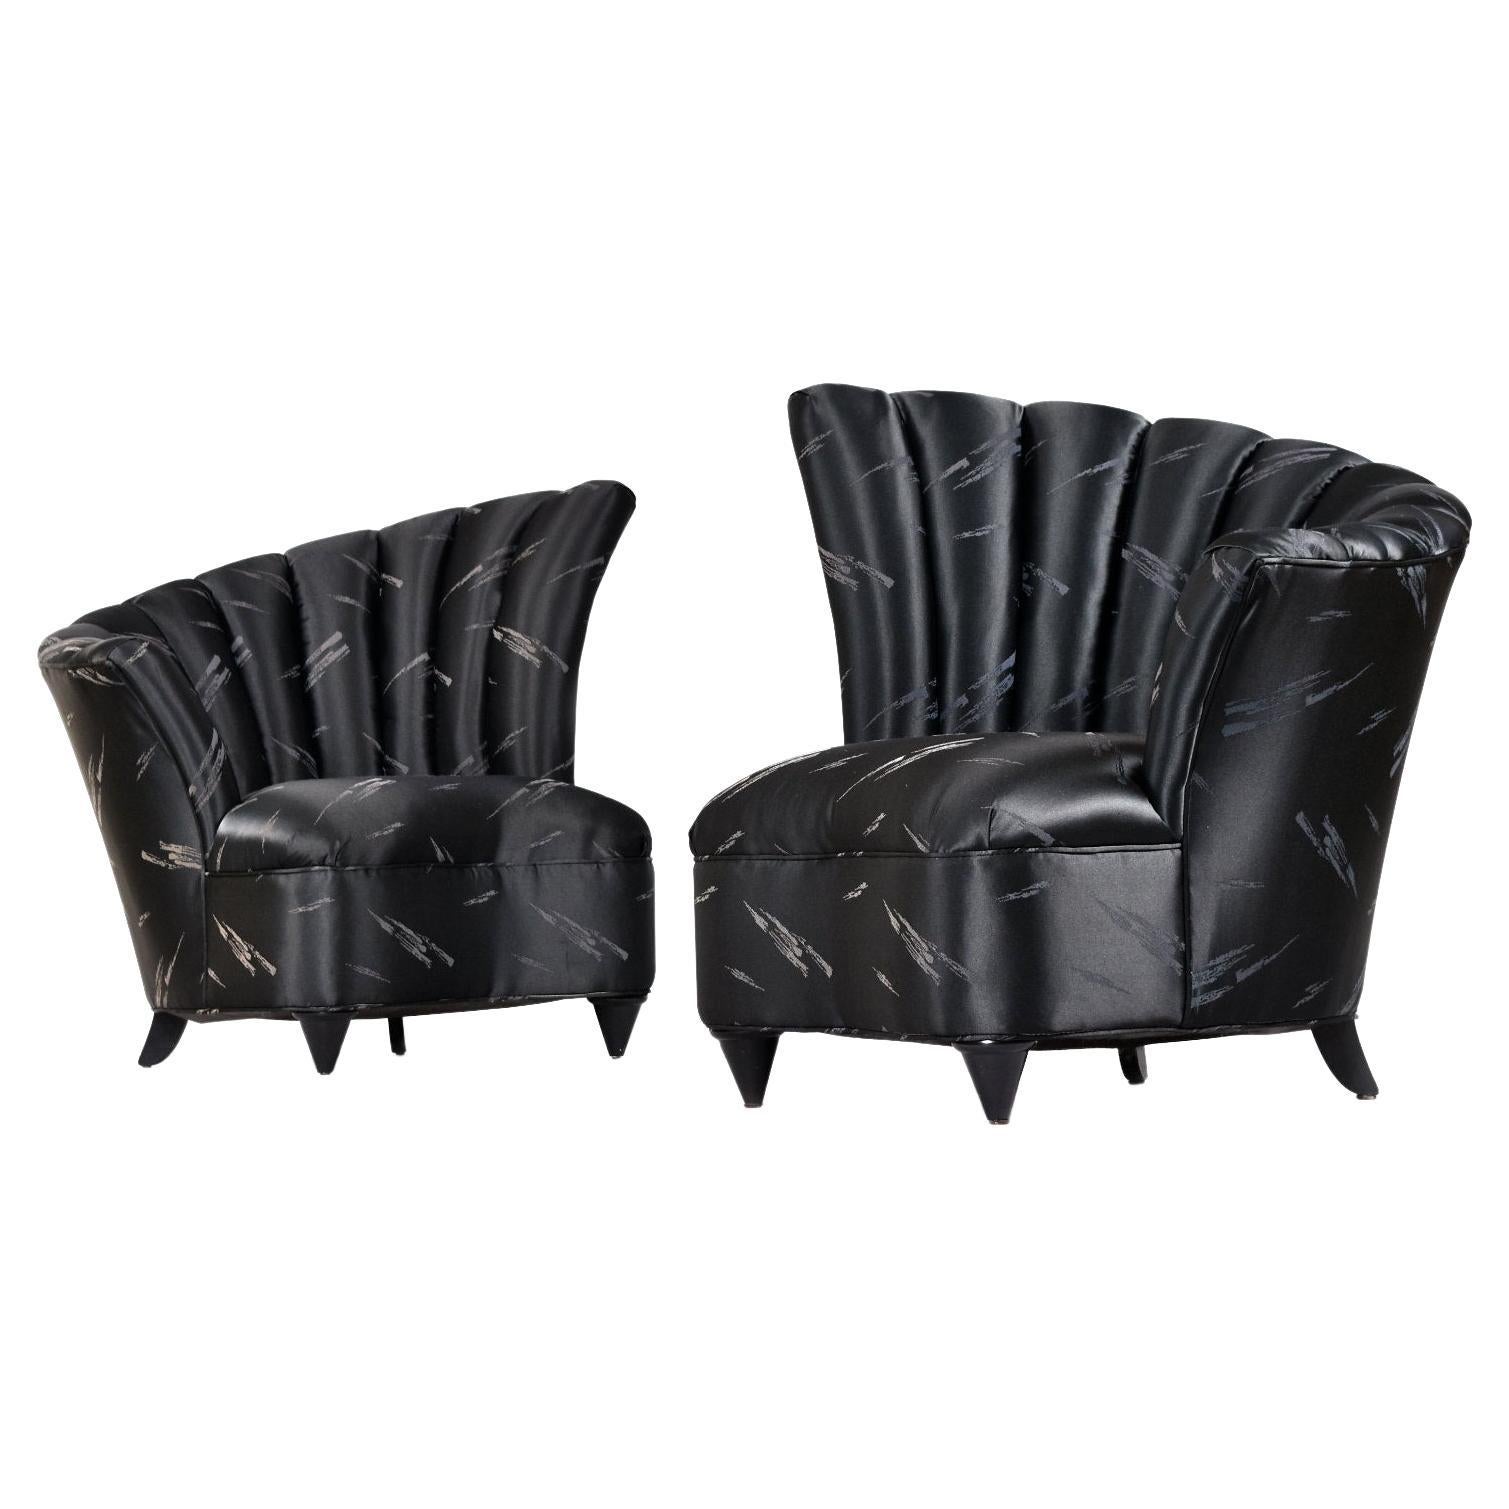 Pair of 1980s Neo-Deco Style Black Satin Scallop Fan Back Slipper Chairs For Sale